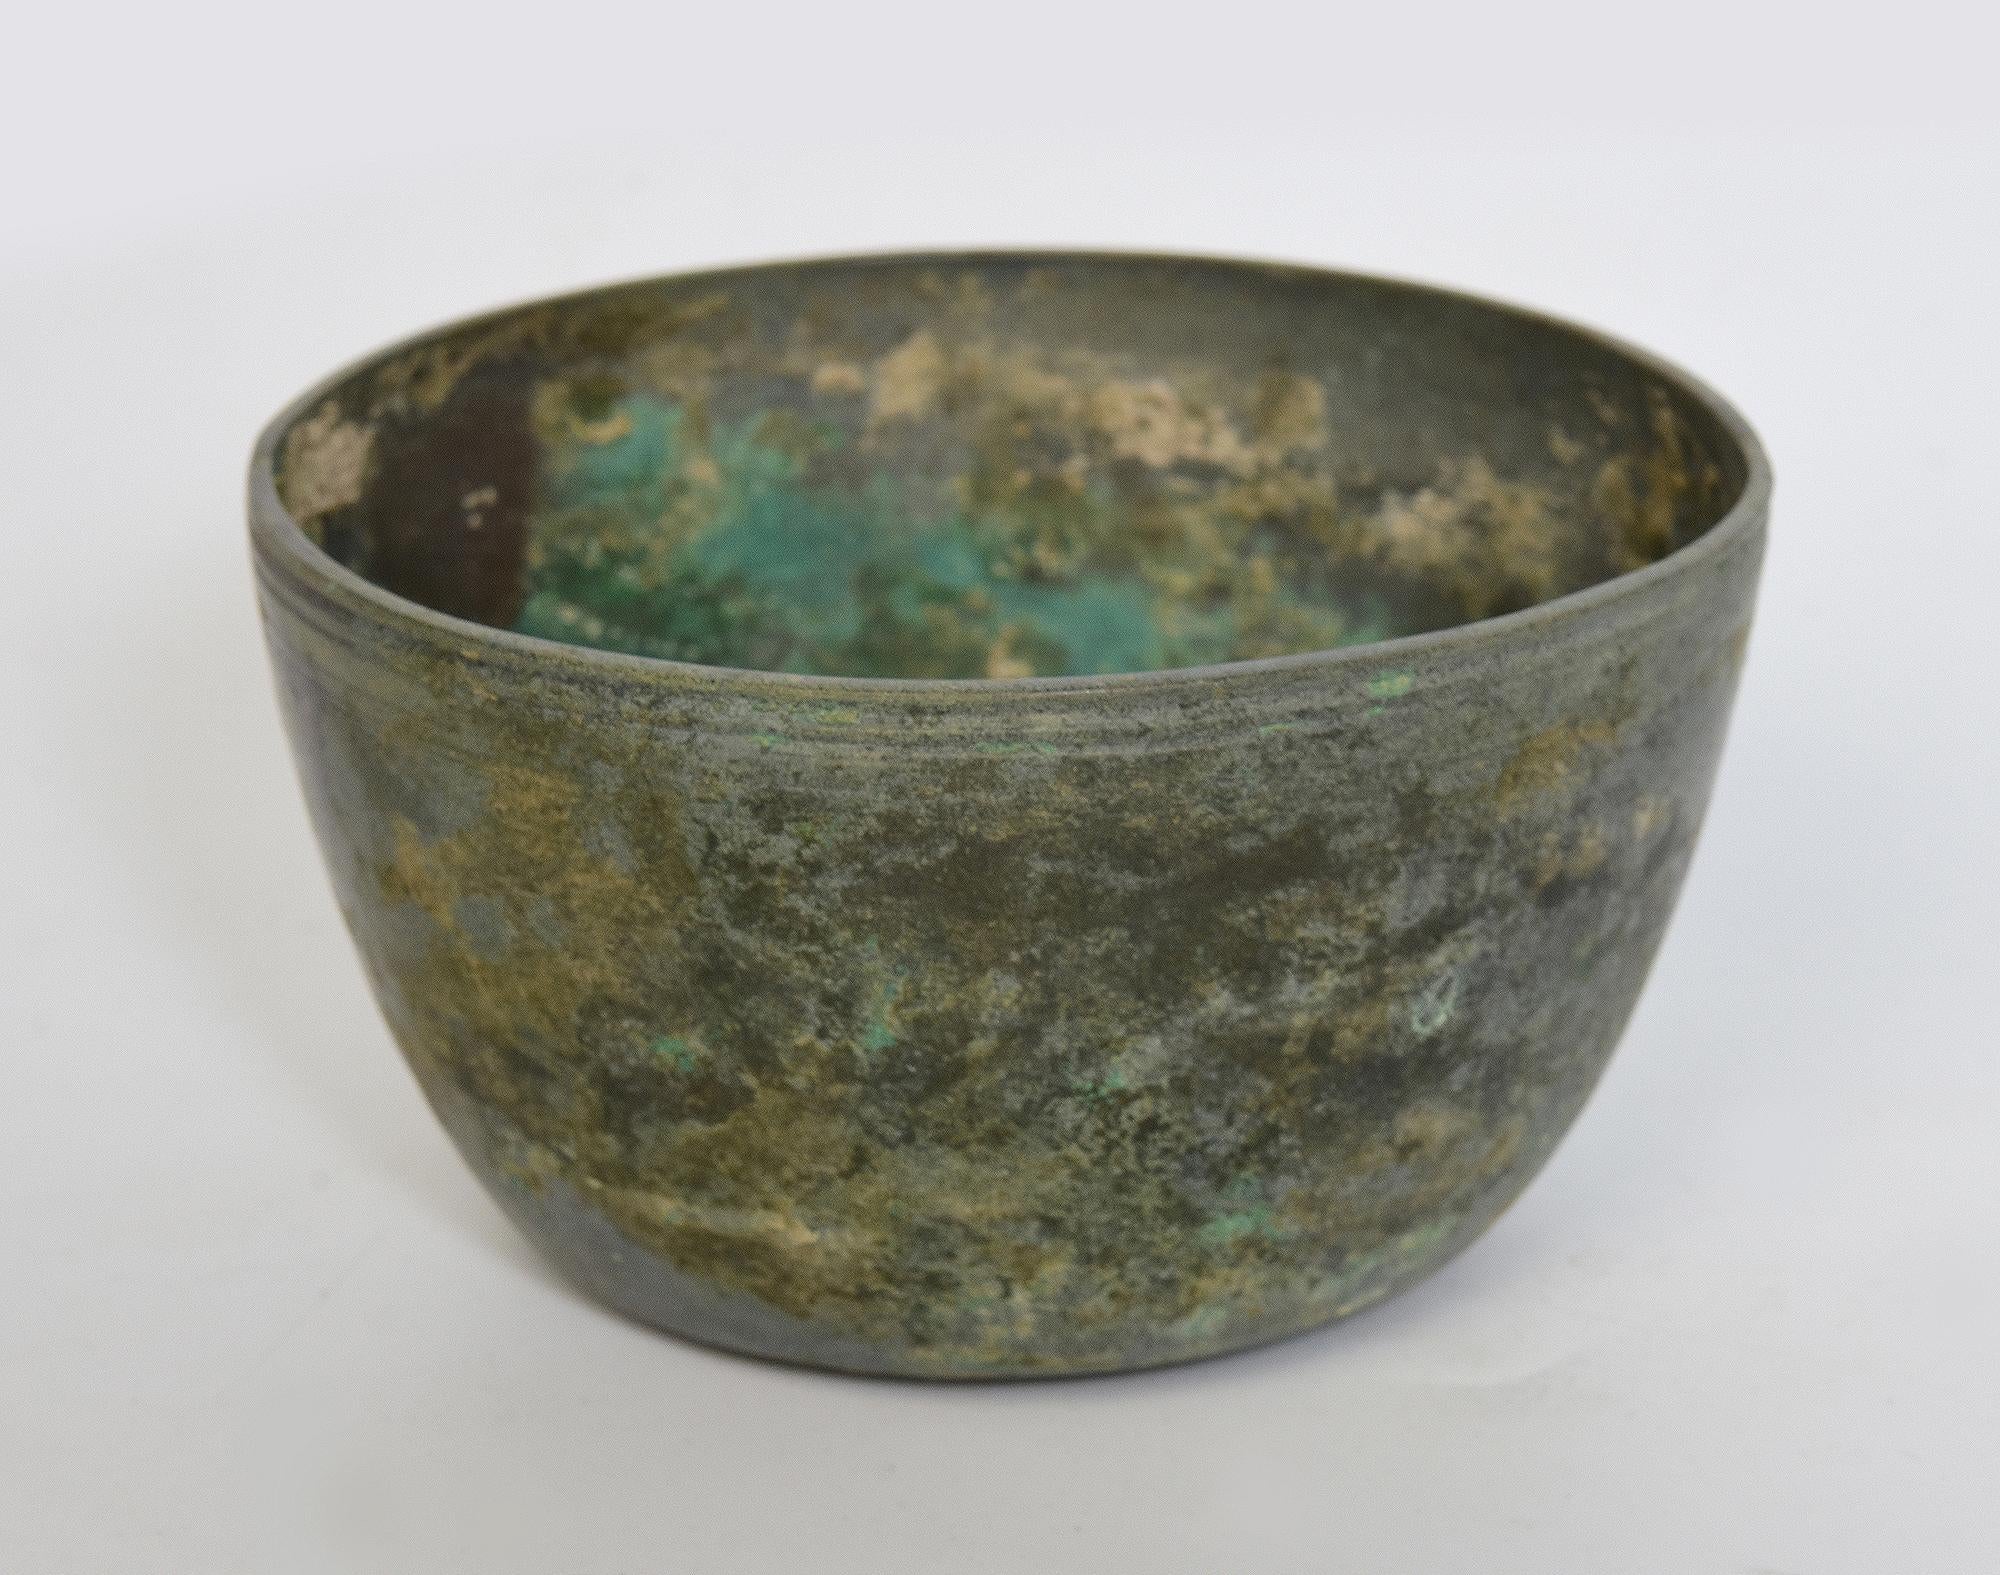 Antique Khmer bronze bowl with nice patina.

Age: Cambodia, Angkor Vat period, 12th Century
Size: Diameter 11.4 C.M. / Height 6.3 C.M.
Condition: Nice condition overall (some expected degradation due to its age).

100% satisfaction and authenticity